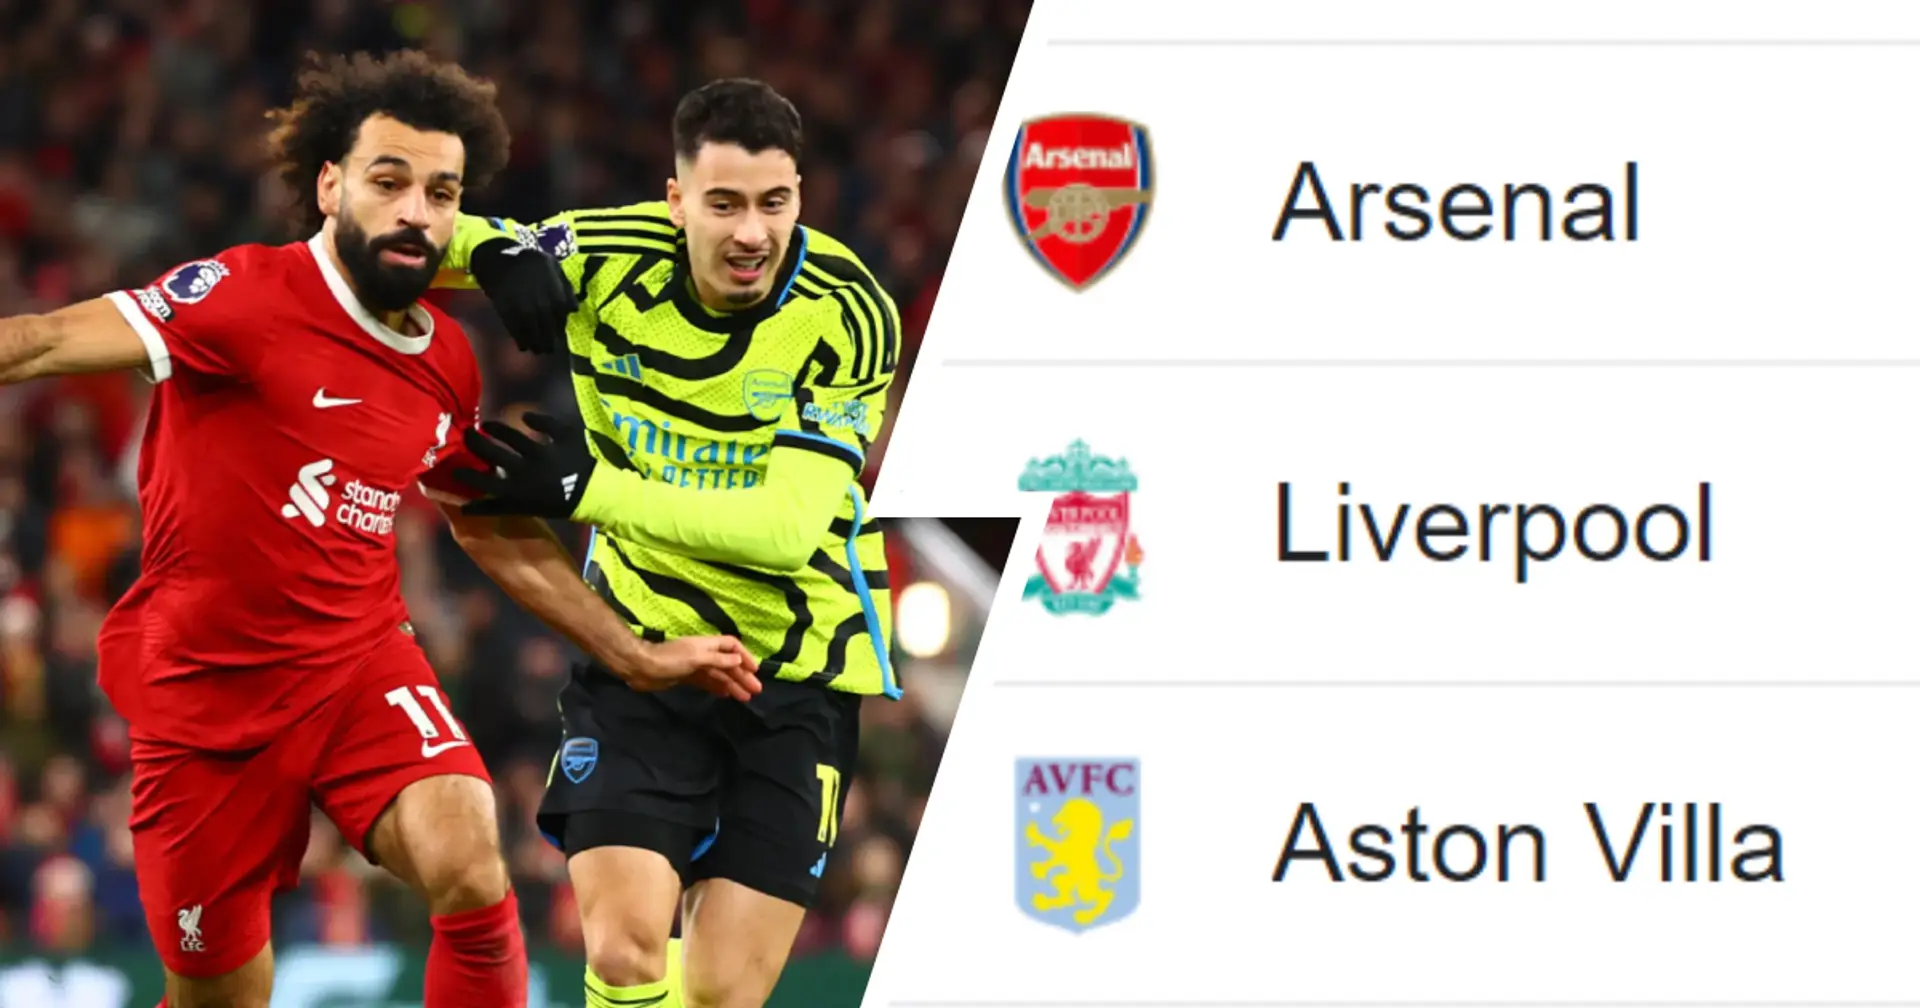 Liverpool still second: Premier League title race update after Arsenal draw